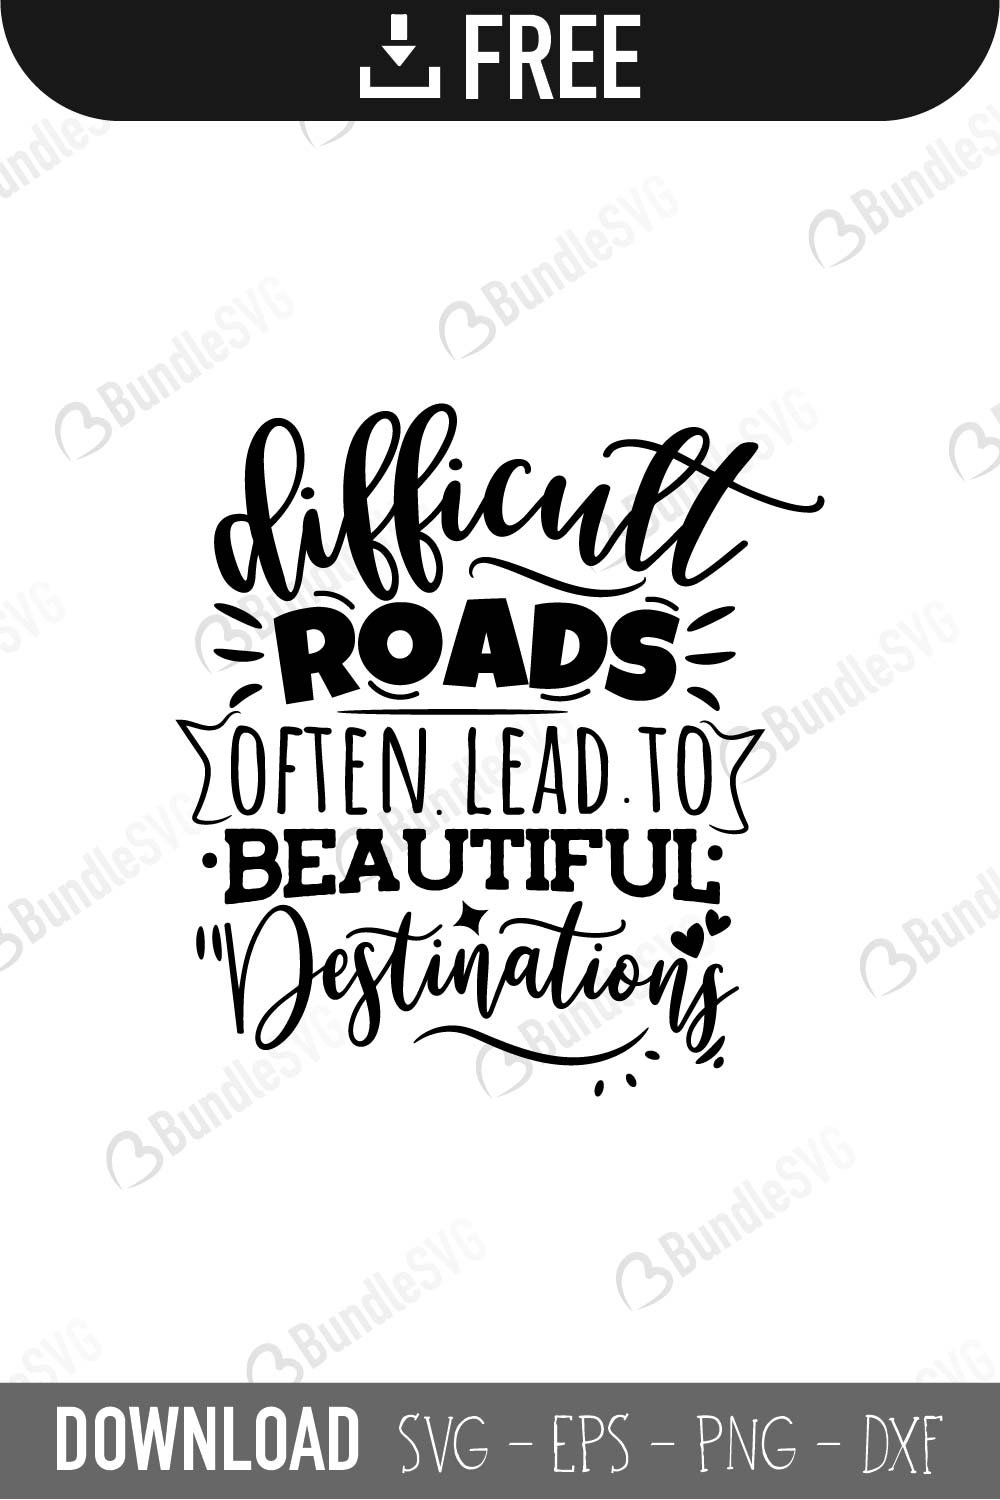 Download Inspirational Quote Svg Difficult Roads Often Lead To Beautiful Destinations Svg Lead To Beautiful Destinations Svg Difficult Roads Svg Craft Supplies Tools Materials Jewellerymilad Com